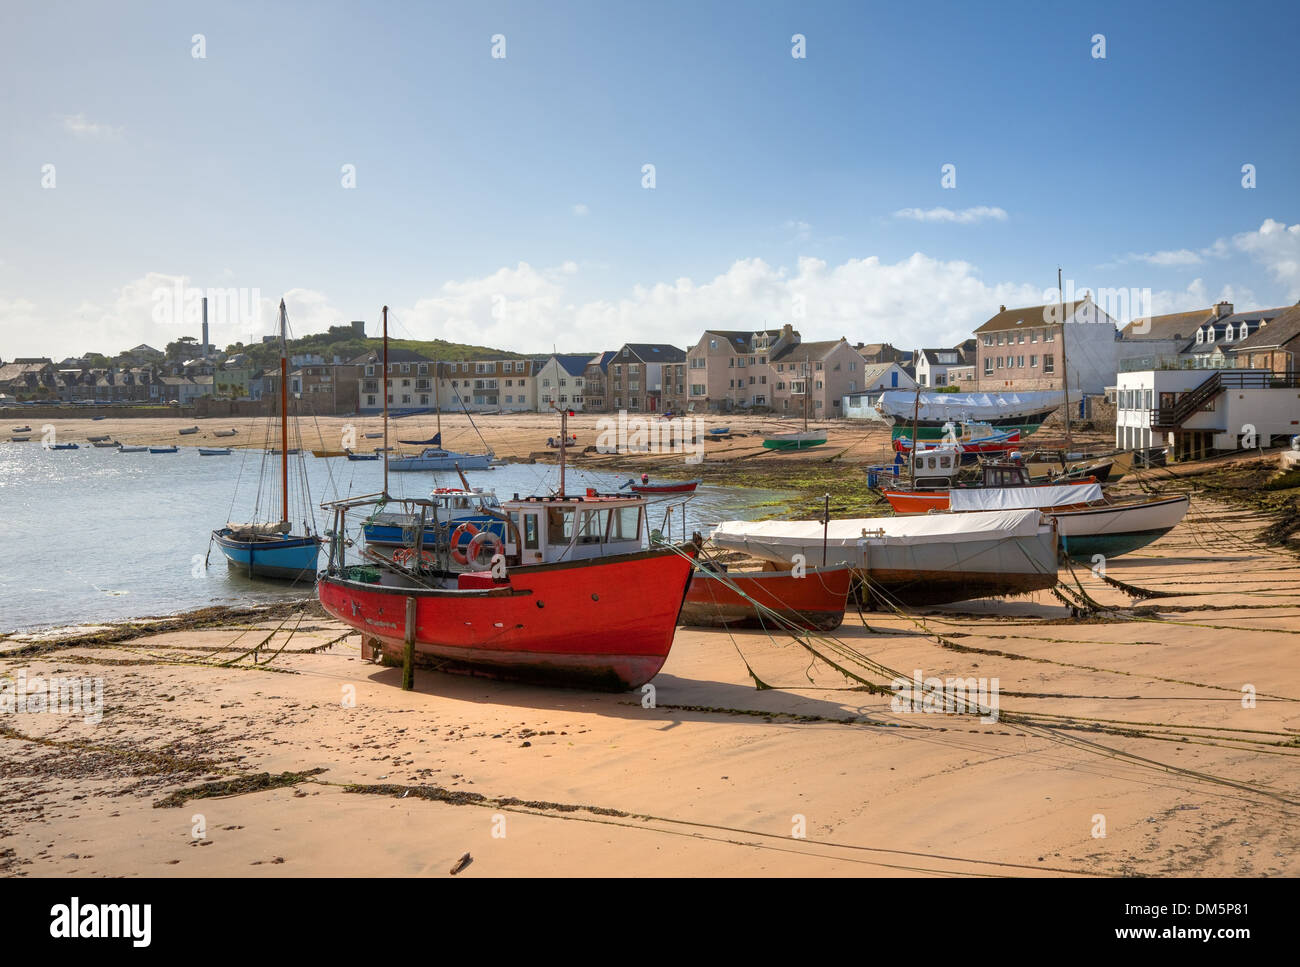 Fishing and sailing boats at St Mary’s Harbour, St Mary’s, Isles of Scilly, Cornwall, England. Stock Photo